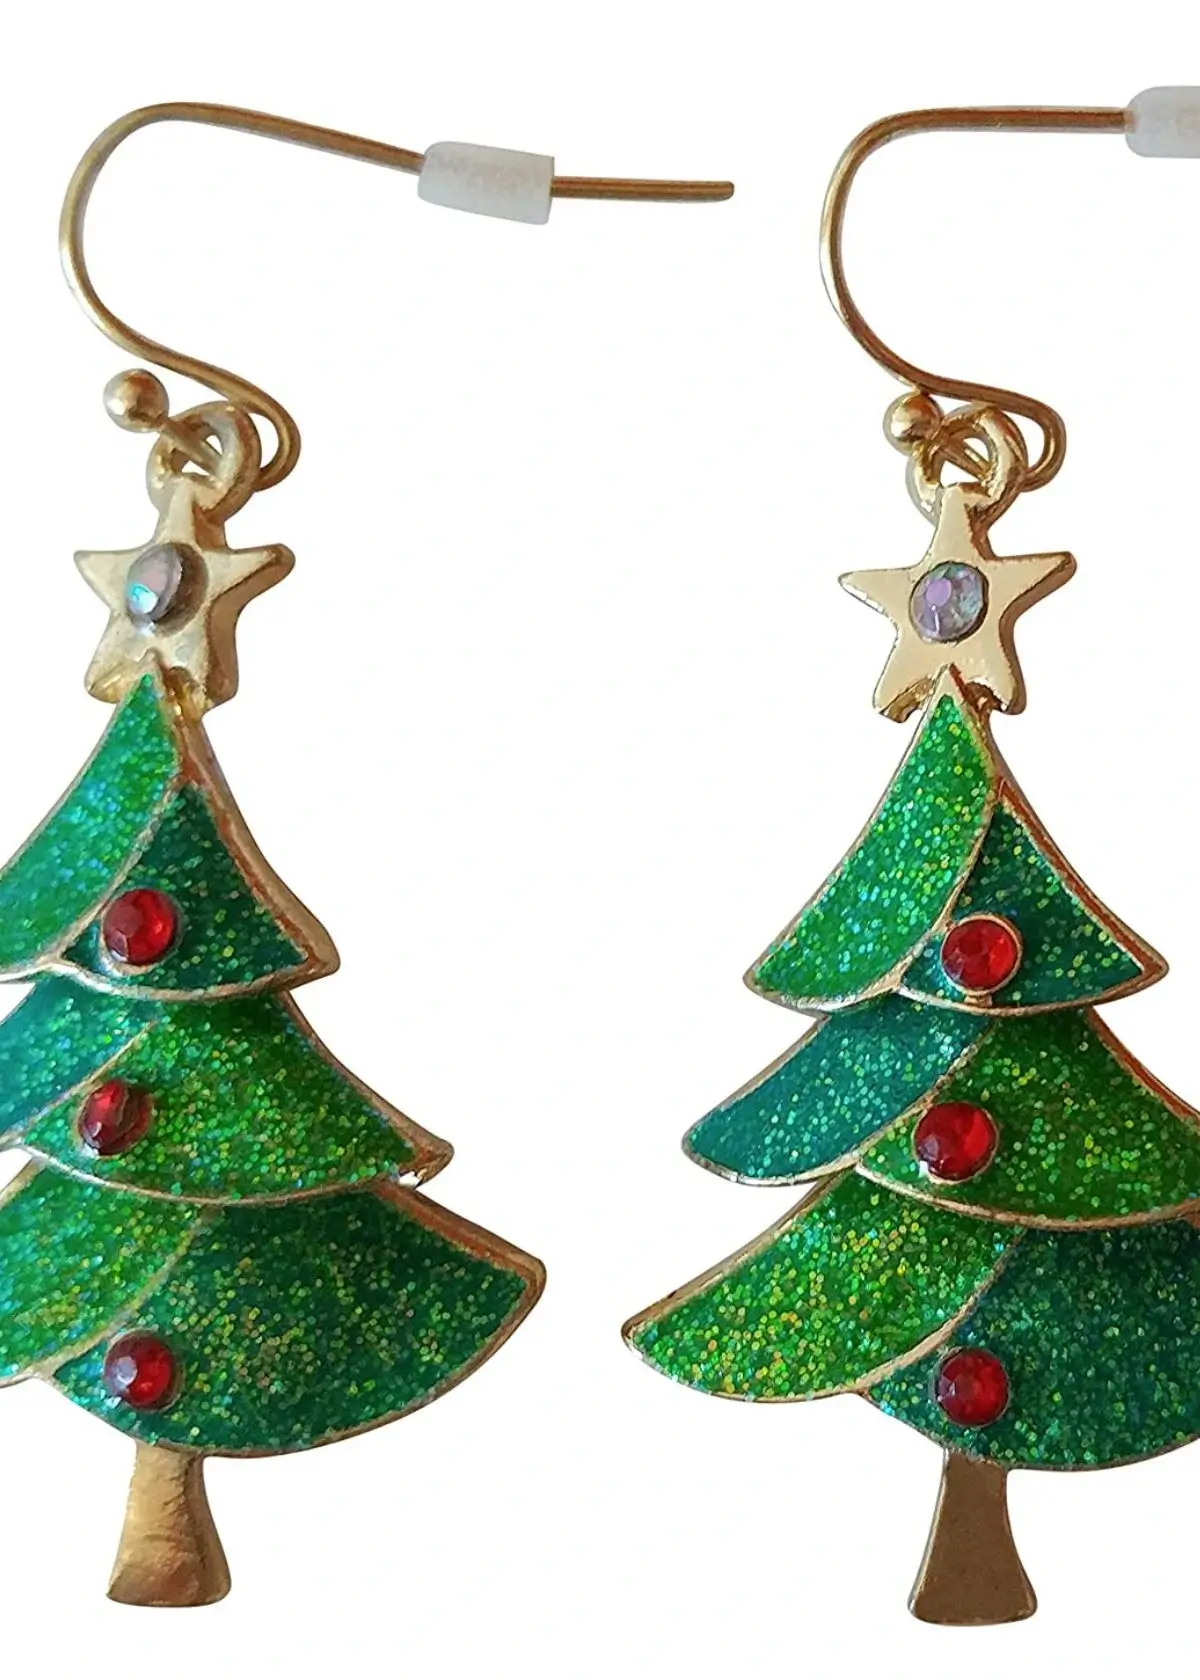 How to Choose the Right Christmas Tree Cake Earrings?